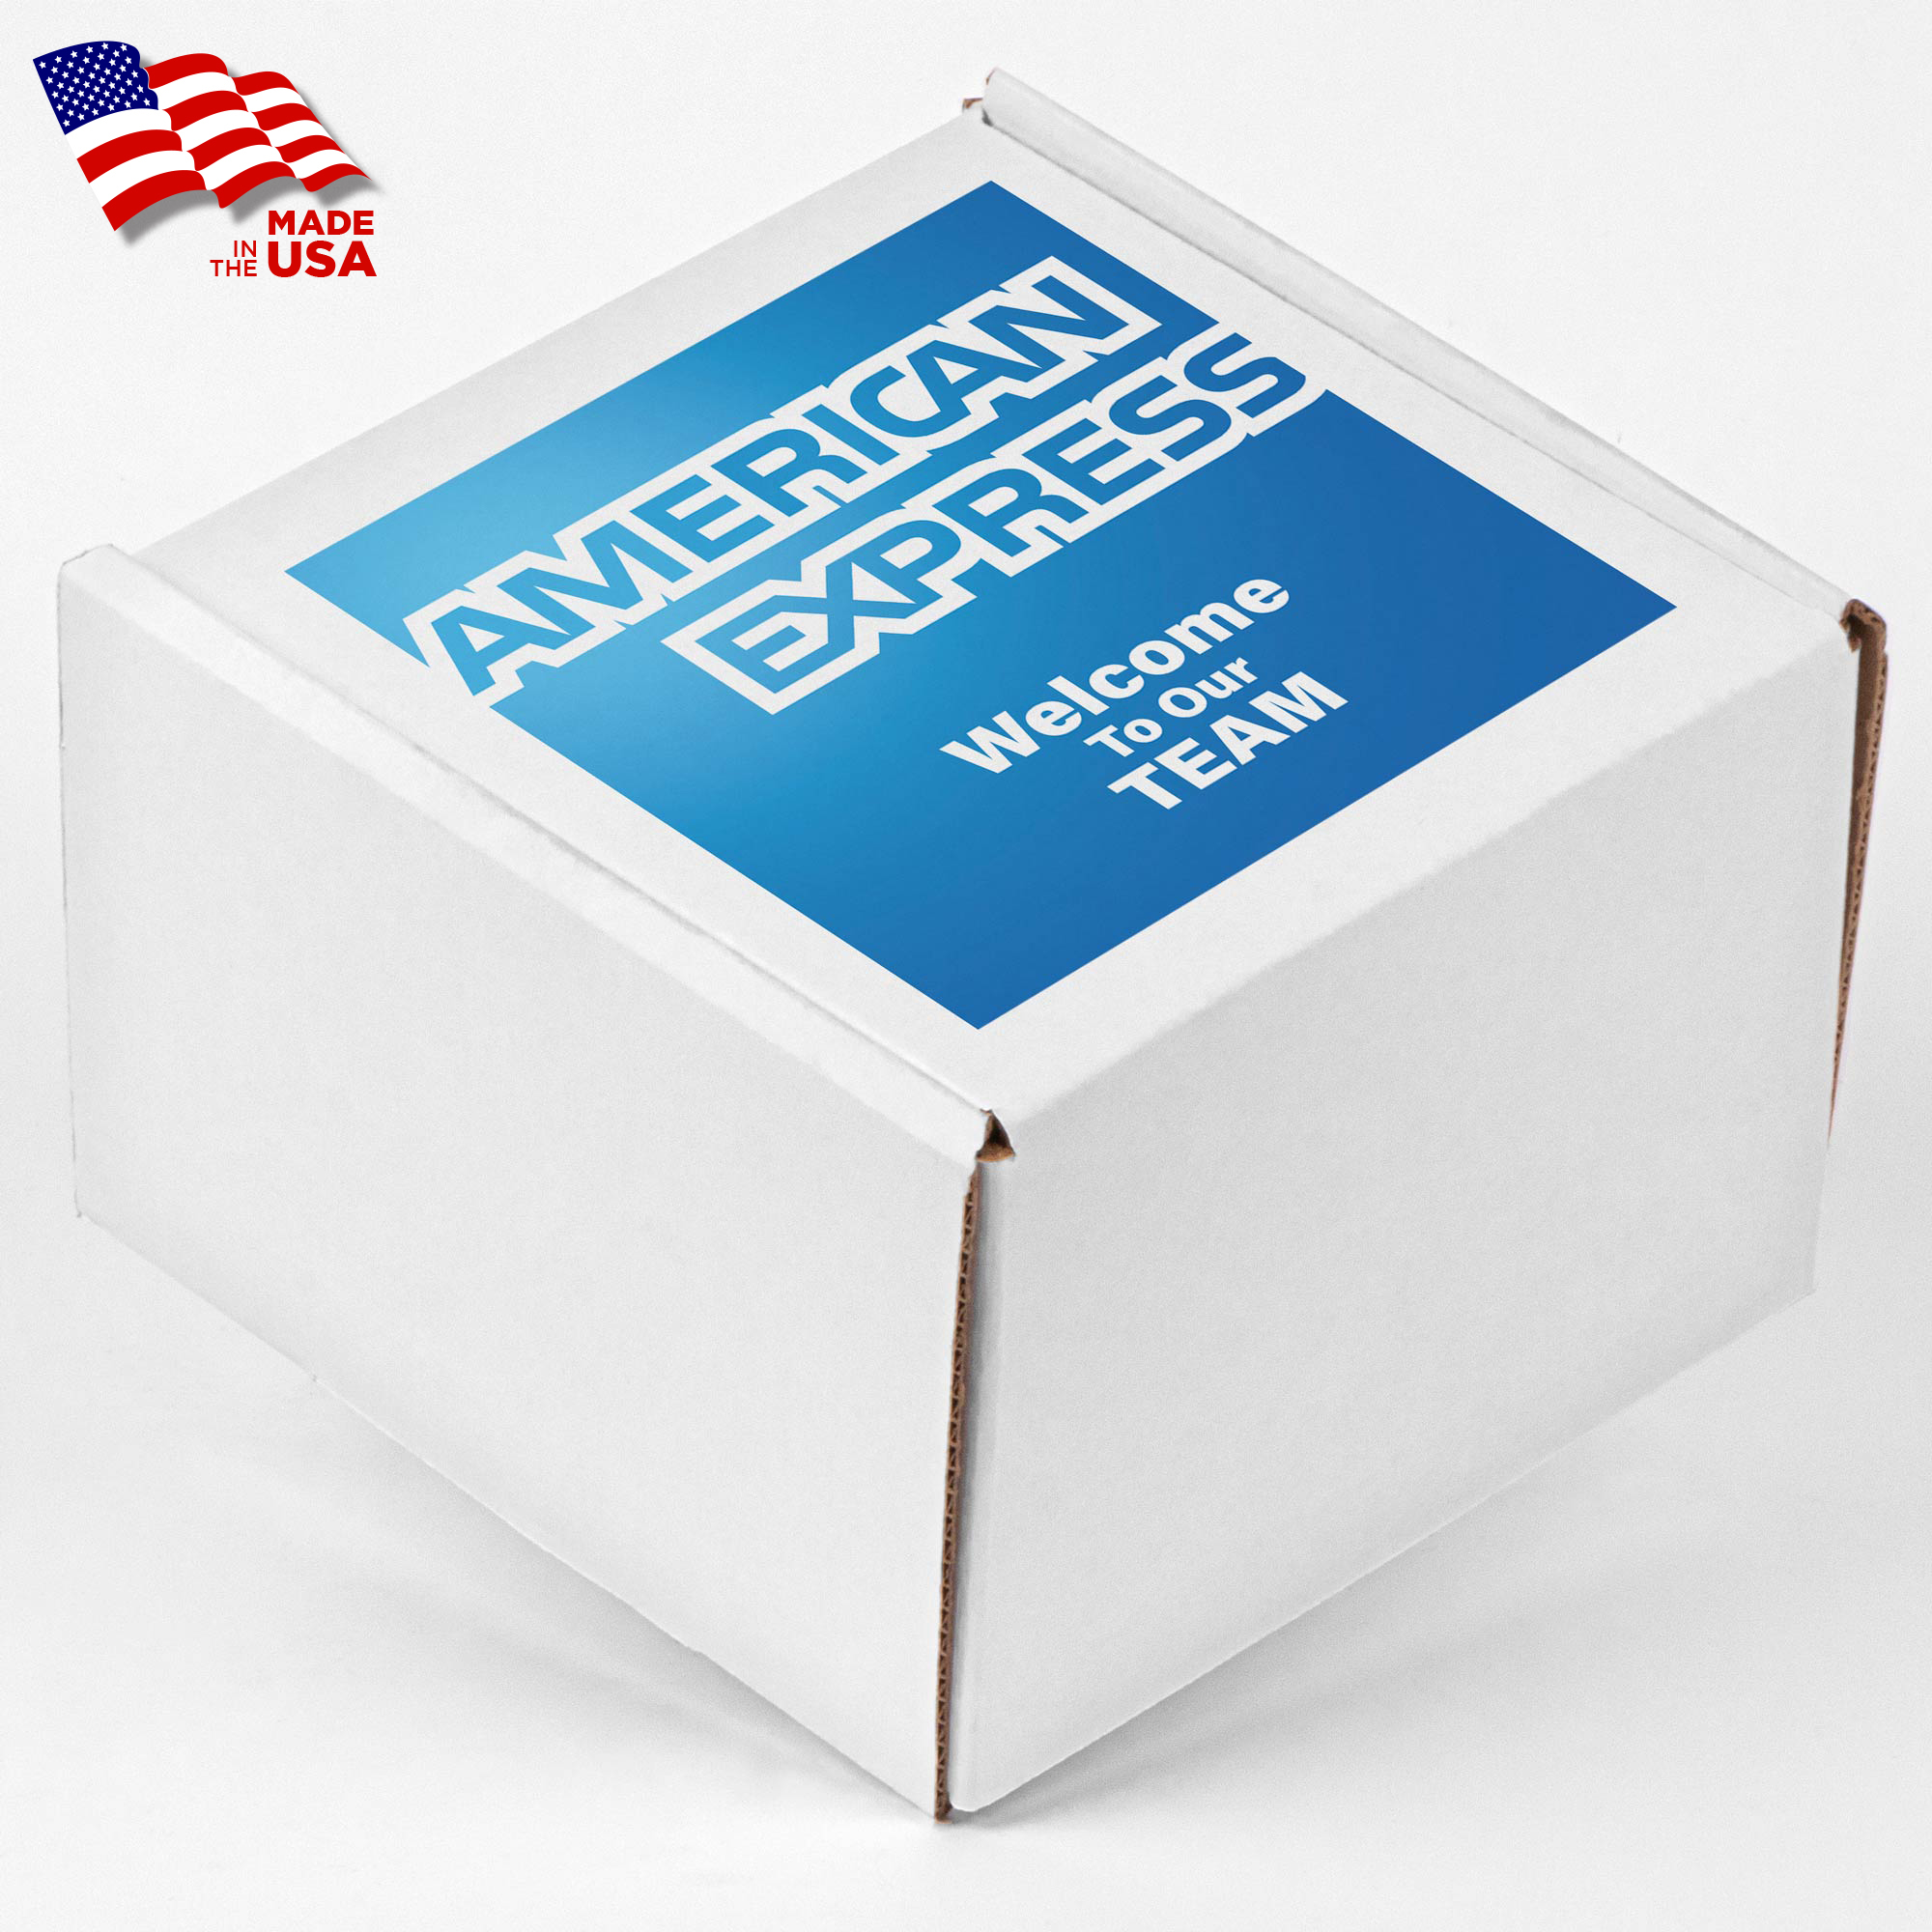 Full Color Printed Corrugated Box Small 6x6x4 For Mailers, Gifting And Kits - Printed boxes are a great way for making a custom branded presentations, direct mail marketing campaigns, custom gifts, subscription boxes, influencer boxes, 'Welcome' kits, new product launches and more! Customize these boxes with your brand's message in a full color graphic print that is eye catching and leaves a lasting impression. FEATURES: Eco-Friendly. Biodegradable. Compostable. Recyclable. Made in USA. Must buy one HCL Product to pair with this item. 